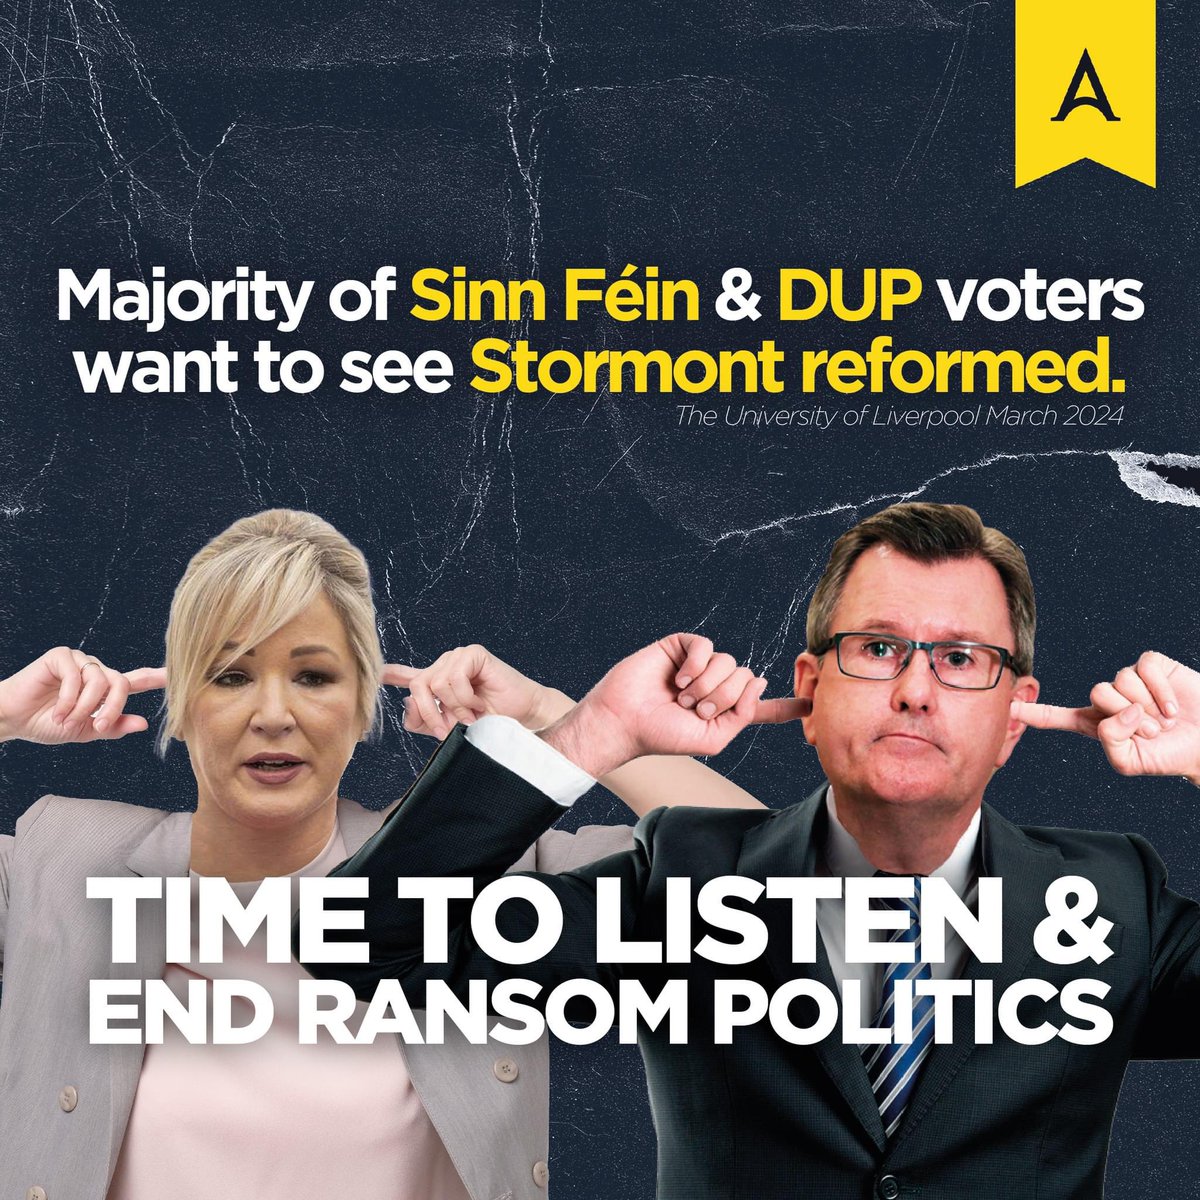 According to a recent poll 78.9% of Sinn Féin voters and 58% of DUP voters back reforming Stormont so that no single party can collapse it again. It's time for both parties to listen to the public and end ransom politics.